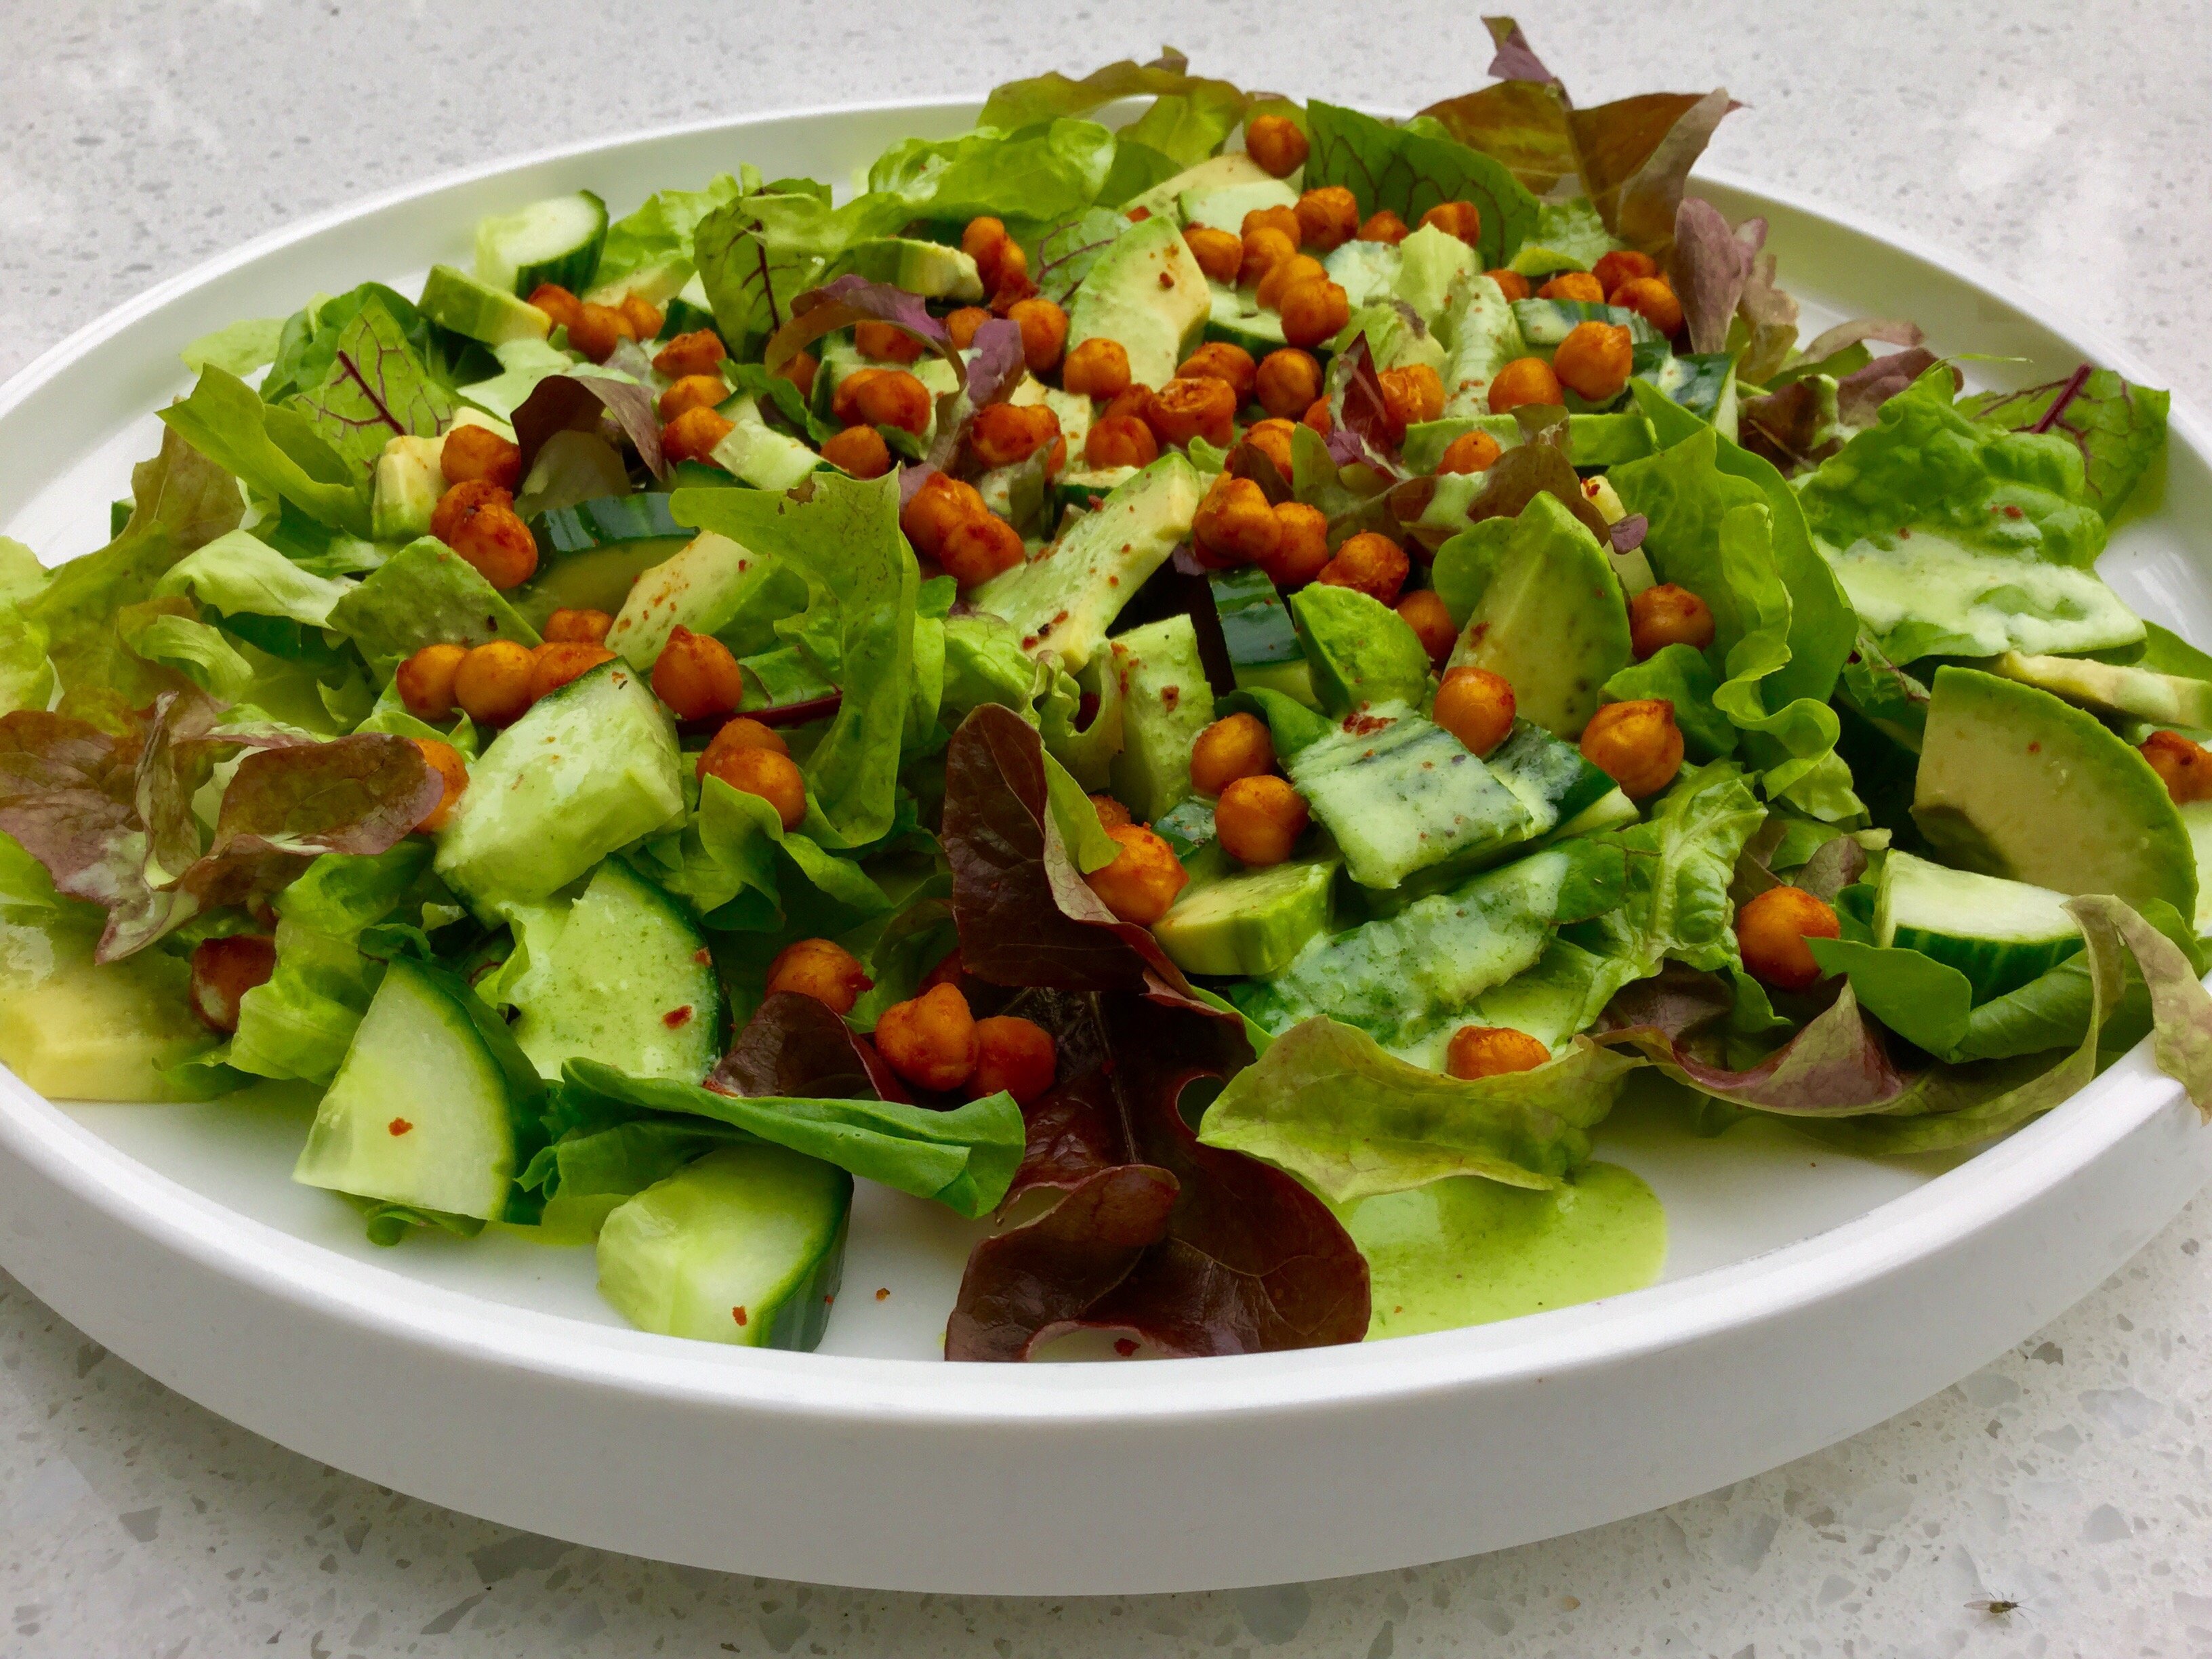 Eat your Greens Salad with Chickpea Croutons and Green Goddess Dressing